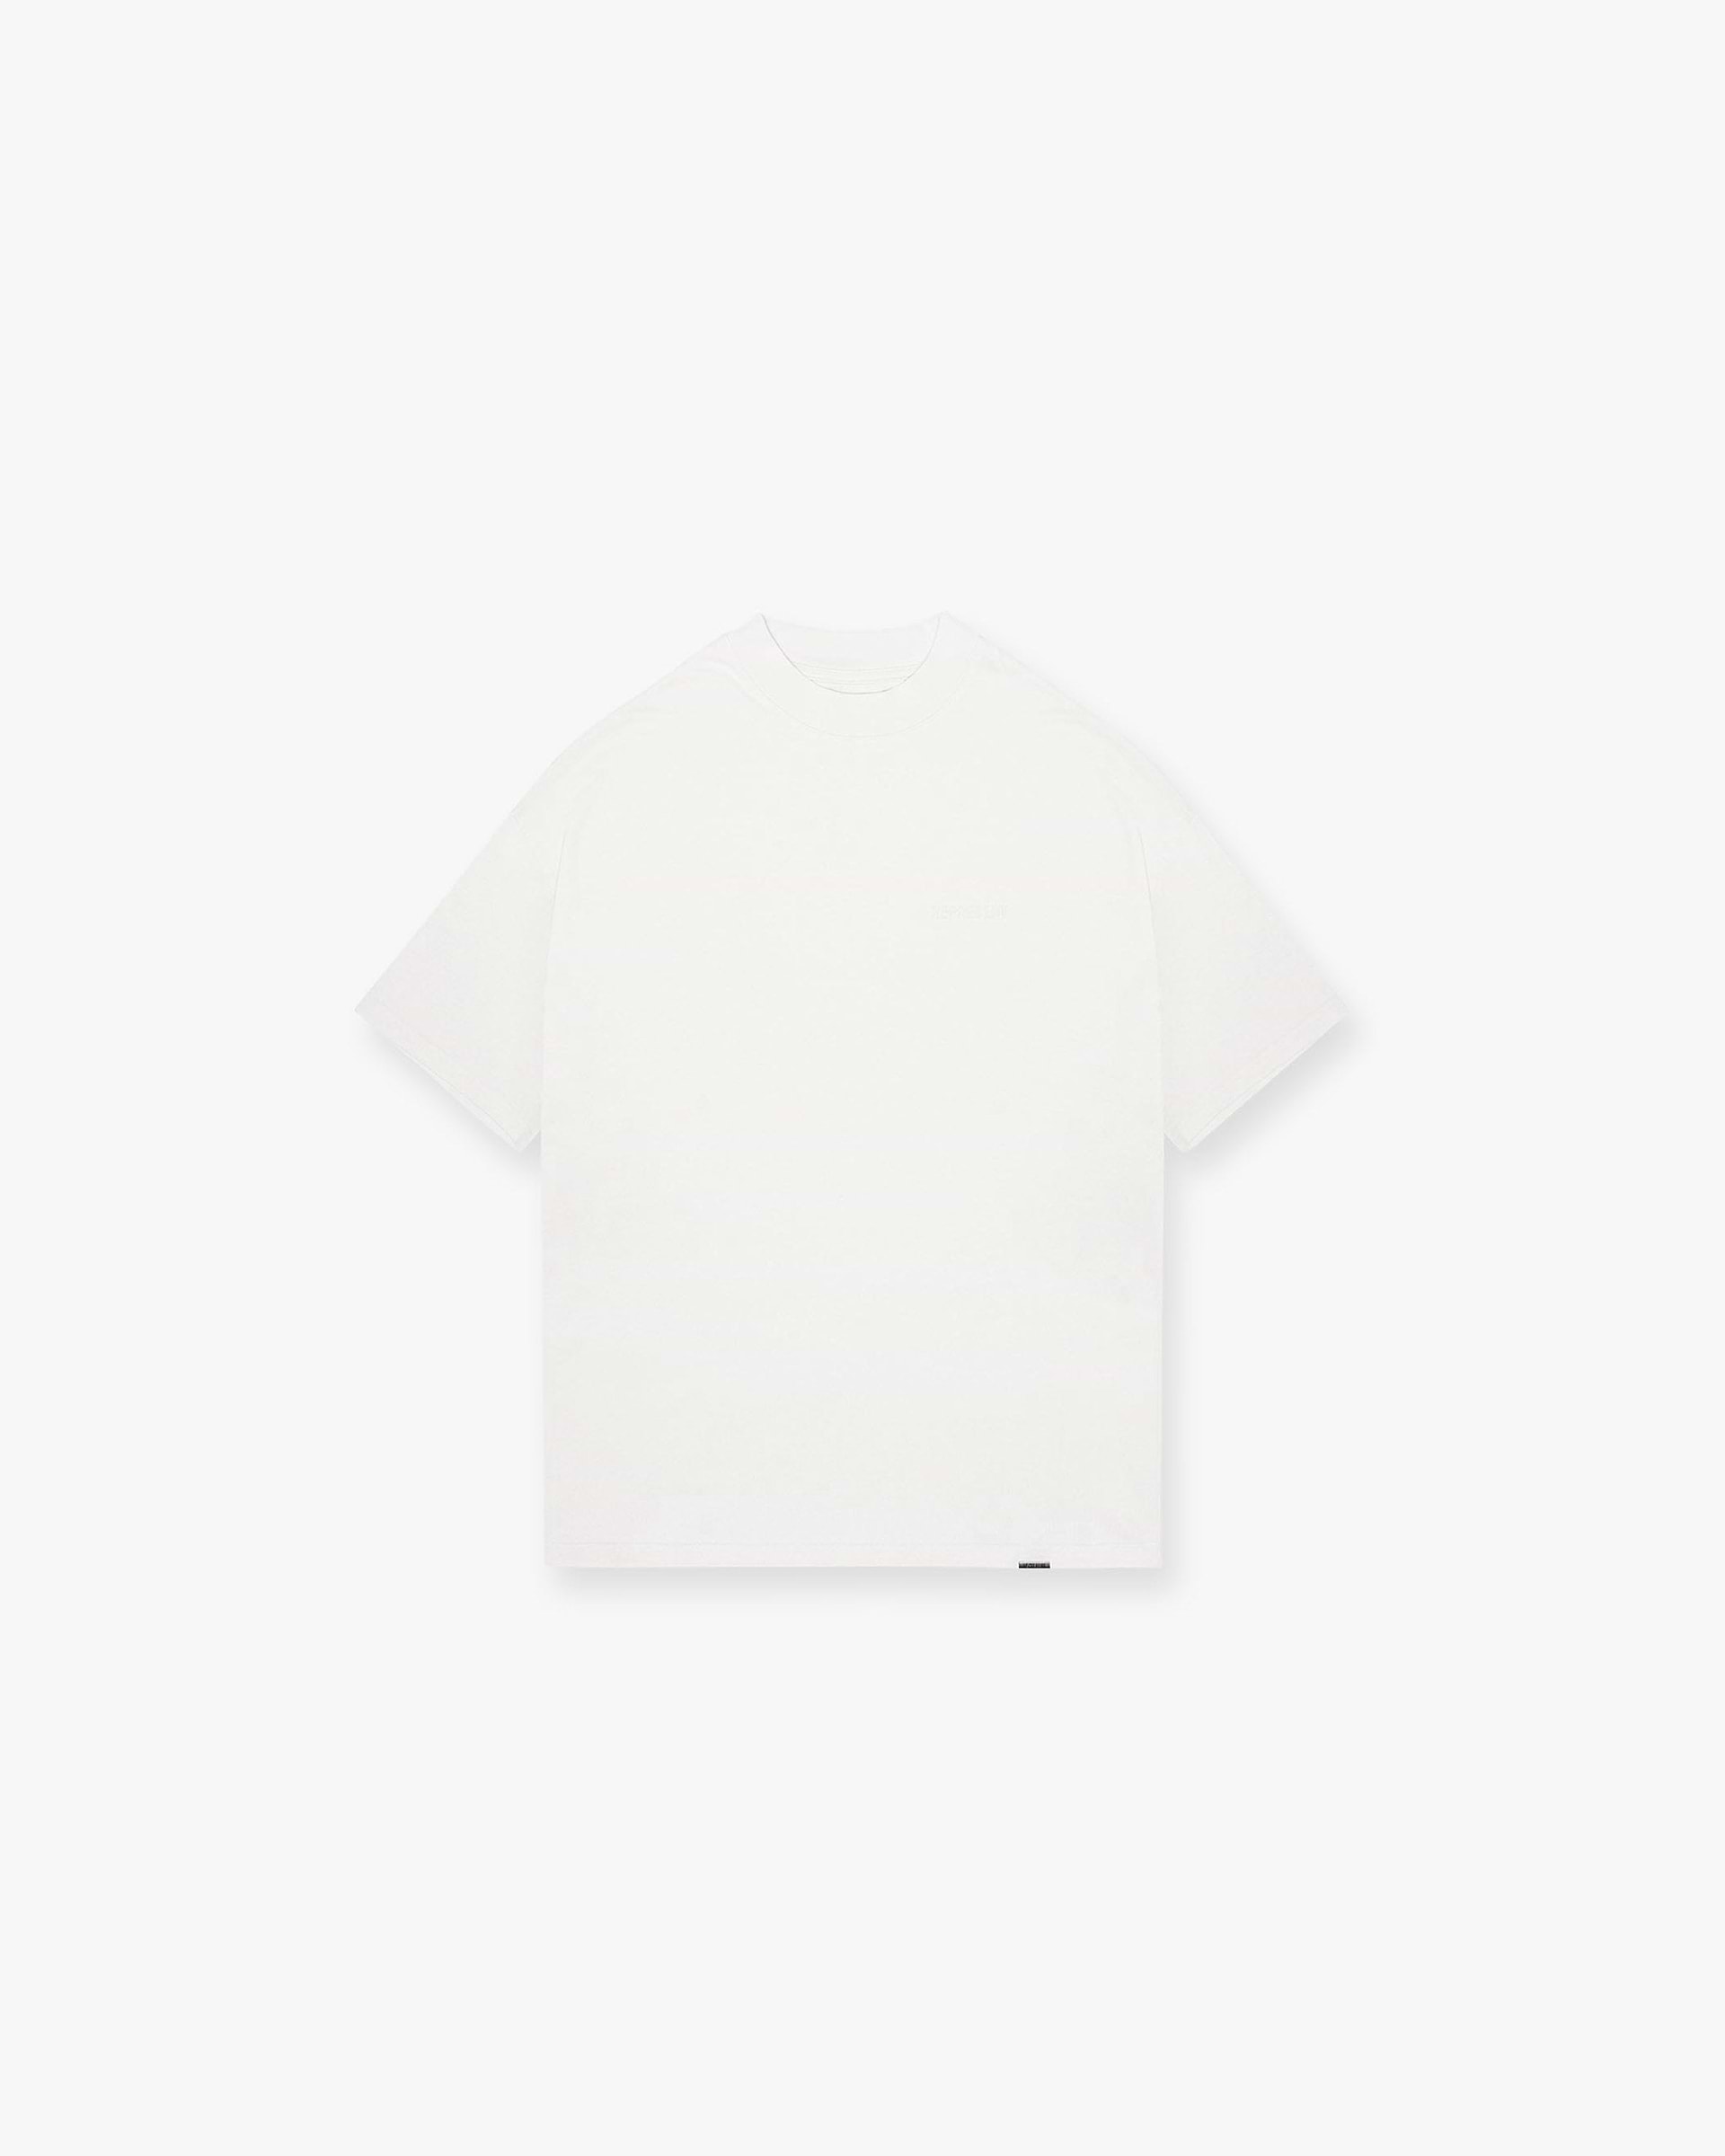 Online Clothing Store - Blank Apparel Styles